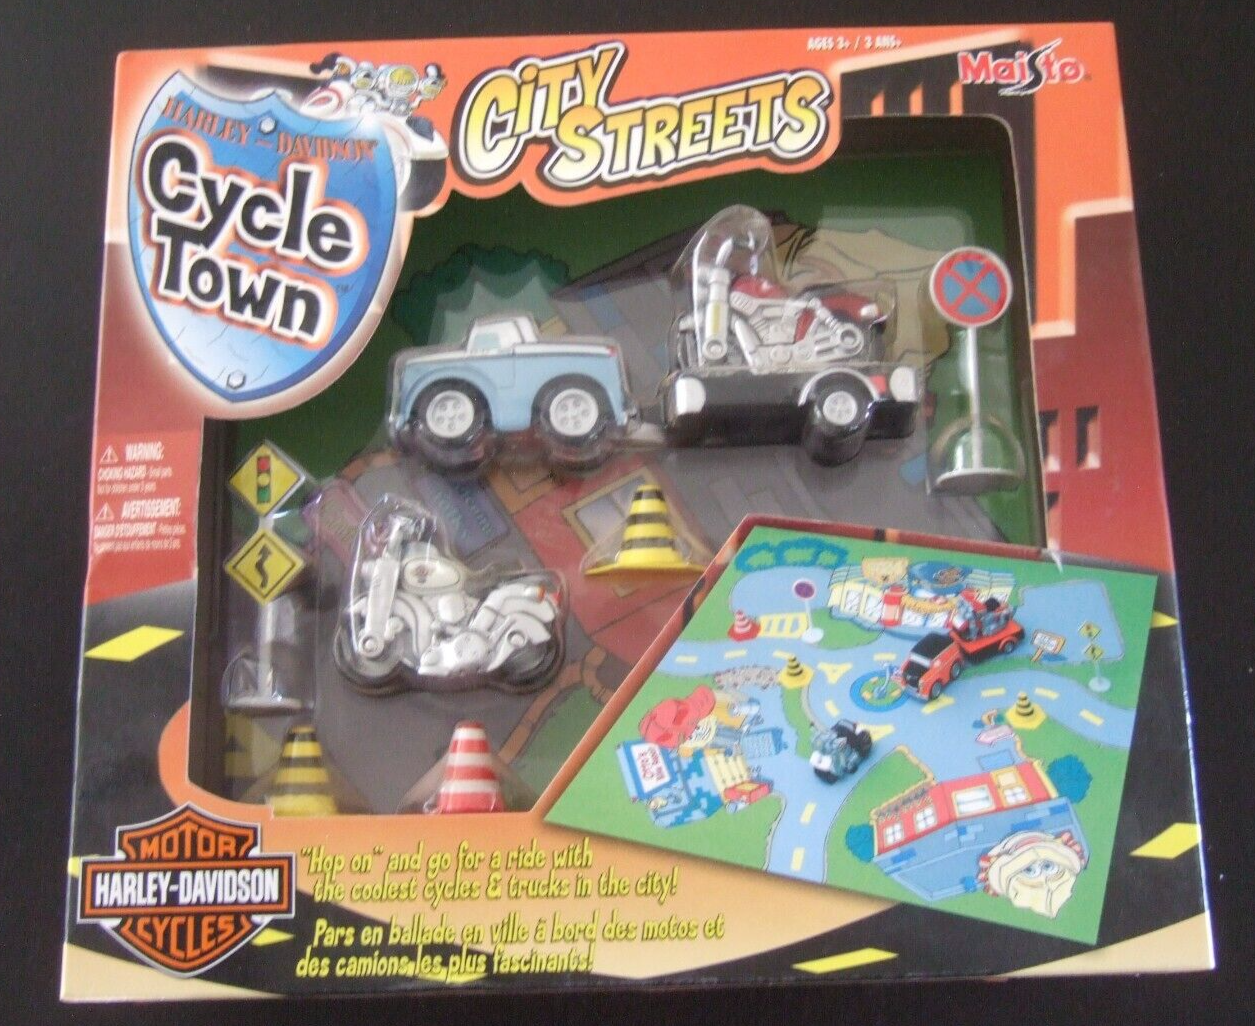 NEW   MAISTO HARLEY-DAVIDSON CYCLE TOWN CITY STREETS PLAYSET   BLUE TOW VEHICLE - $31.50